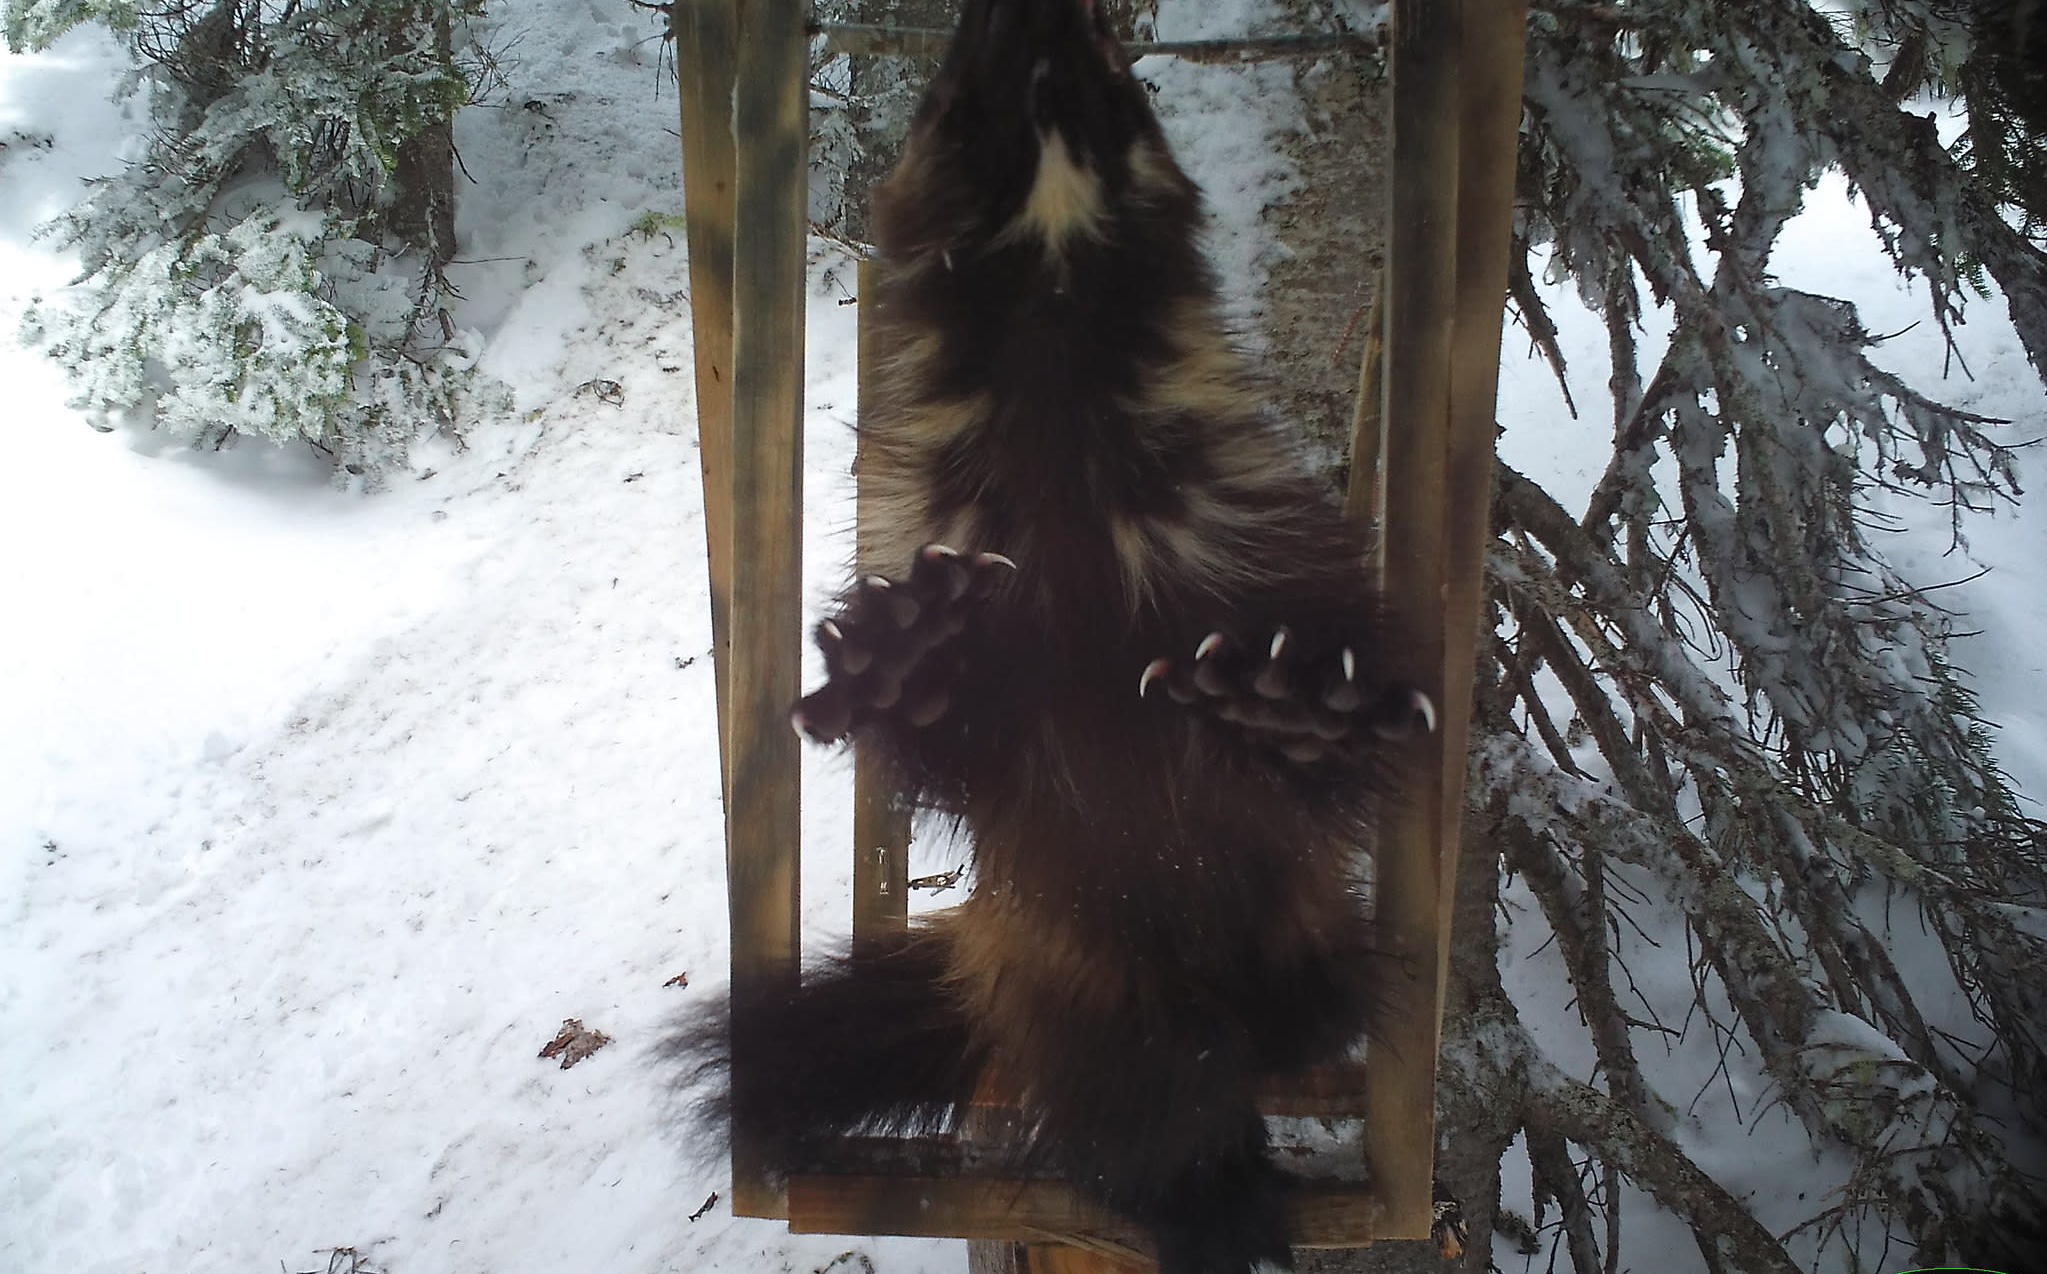 A wolverine perched on the camera stand, showing its stomach, bottom of the paws, and long claws. (Image: NPS/Cascades Carnivore Project, AP)